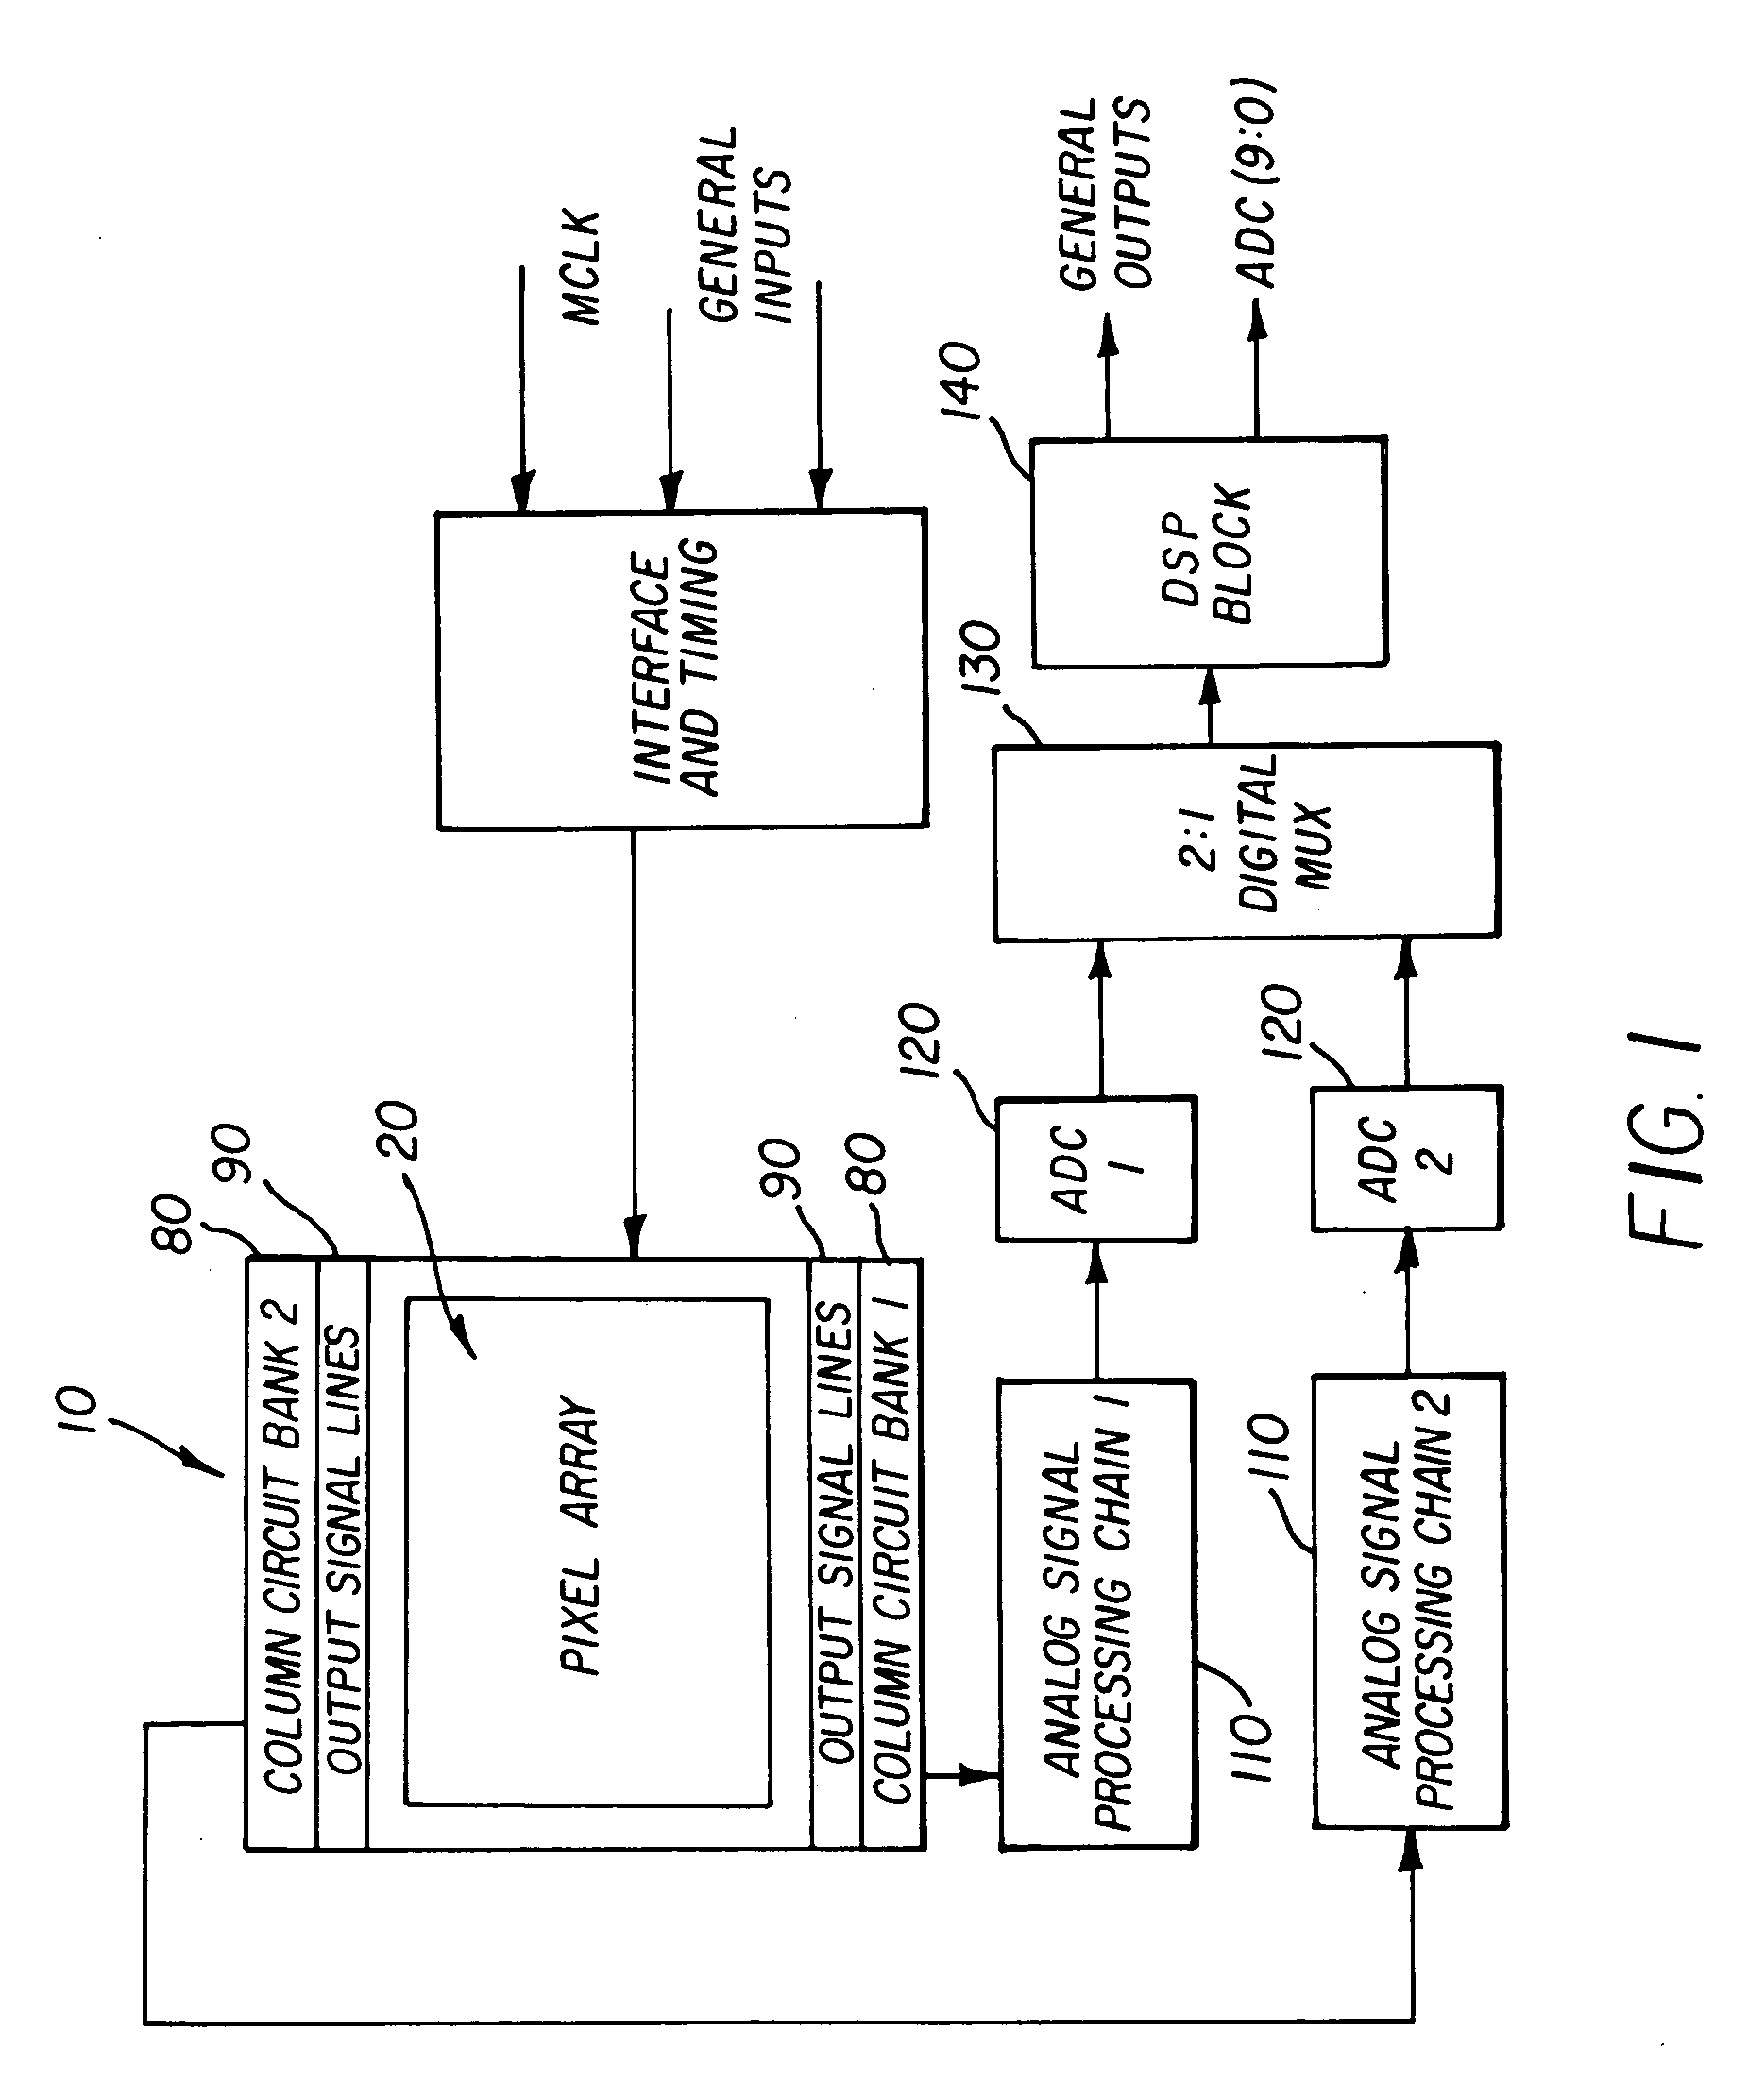 Image sensor with charge binning and dual channel readout